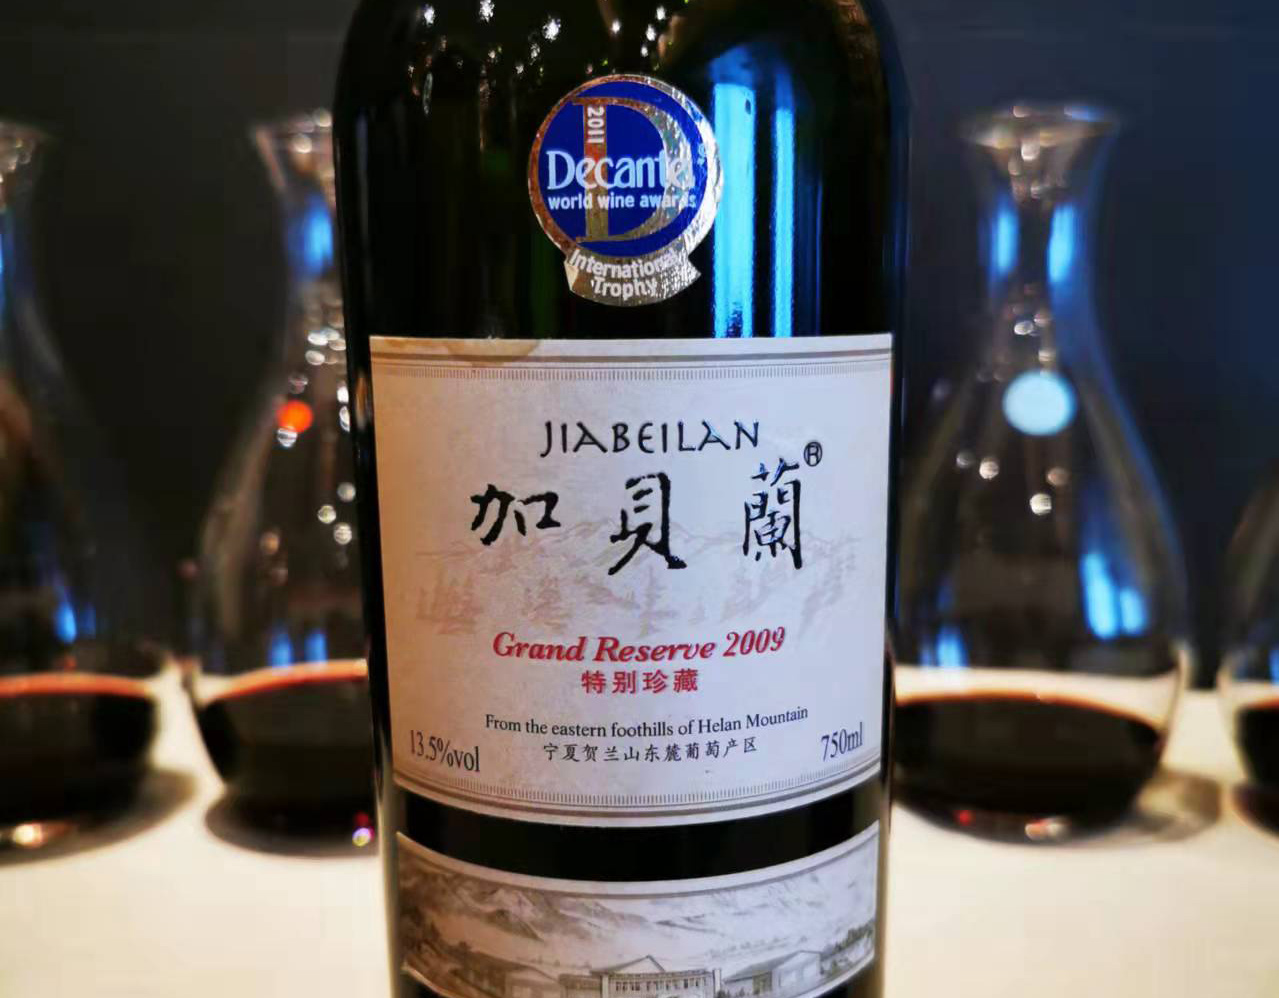 Ten years on: Chinese wine's breakthrough moment at DWWA